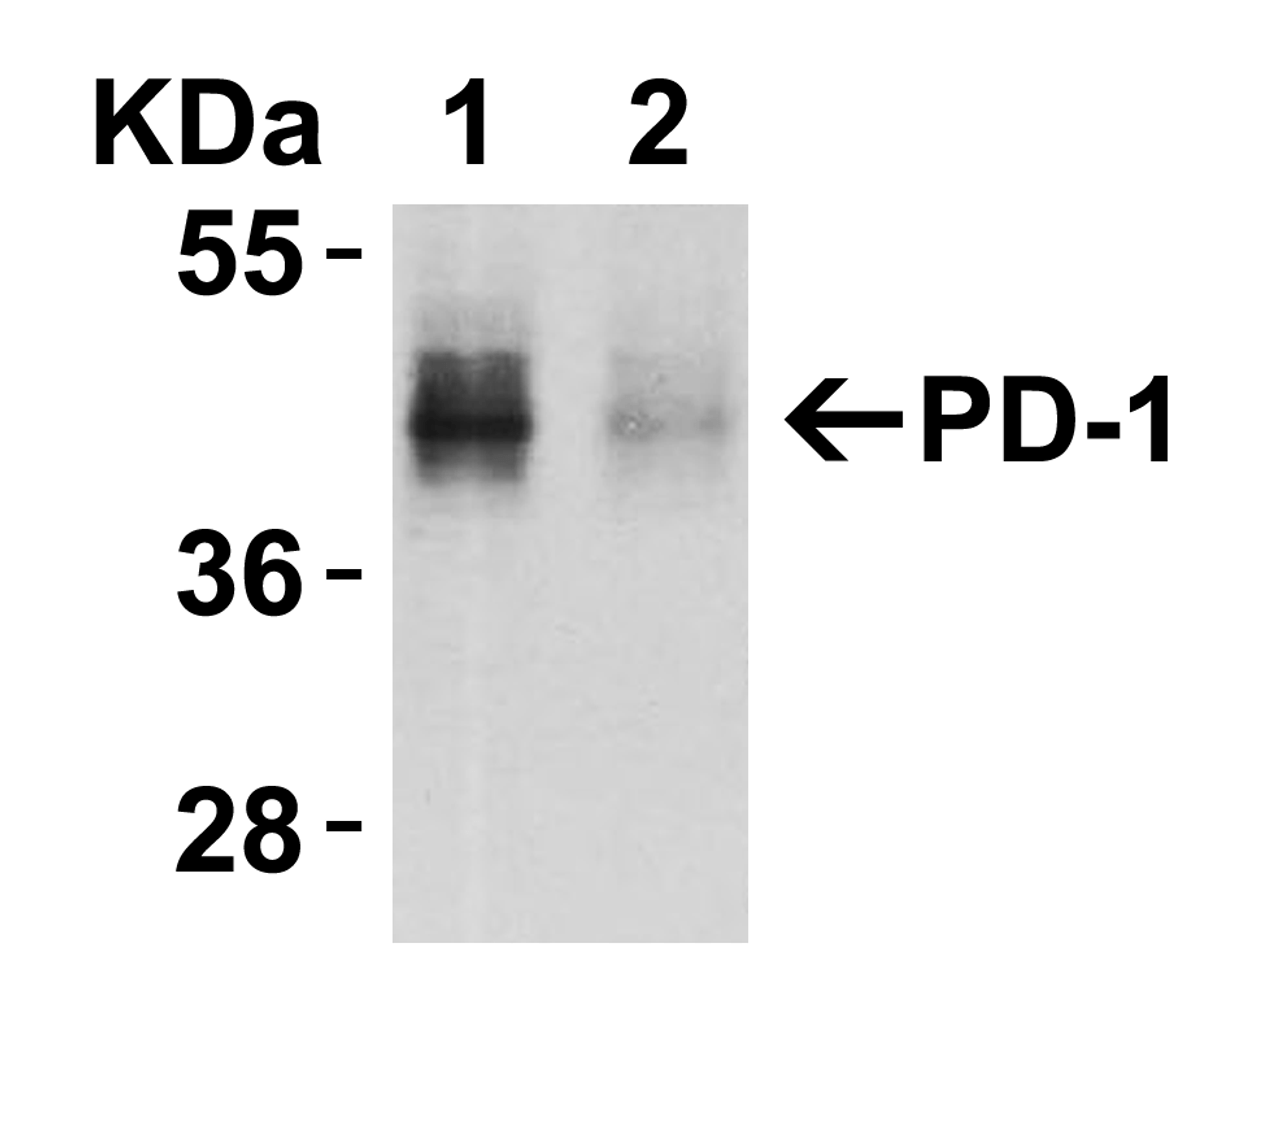 Figure 2 KD Validation in HeLa Cells 
Loading: 10 ug of HeLa WT cell lysates or PD-1 KD cell lysates. Antibodies: PD-1, 4065 (4 ug/mL) and beta-actin 3779 (1 ug/mL) , 1 h incubation at RT in 5% NFDM/TBST.
Secondary: Goat Anti-Rabbit IgG HRP conjugate at 1:10000 dilution.